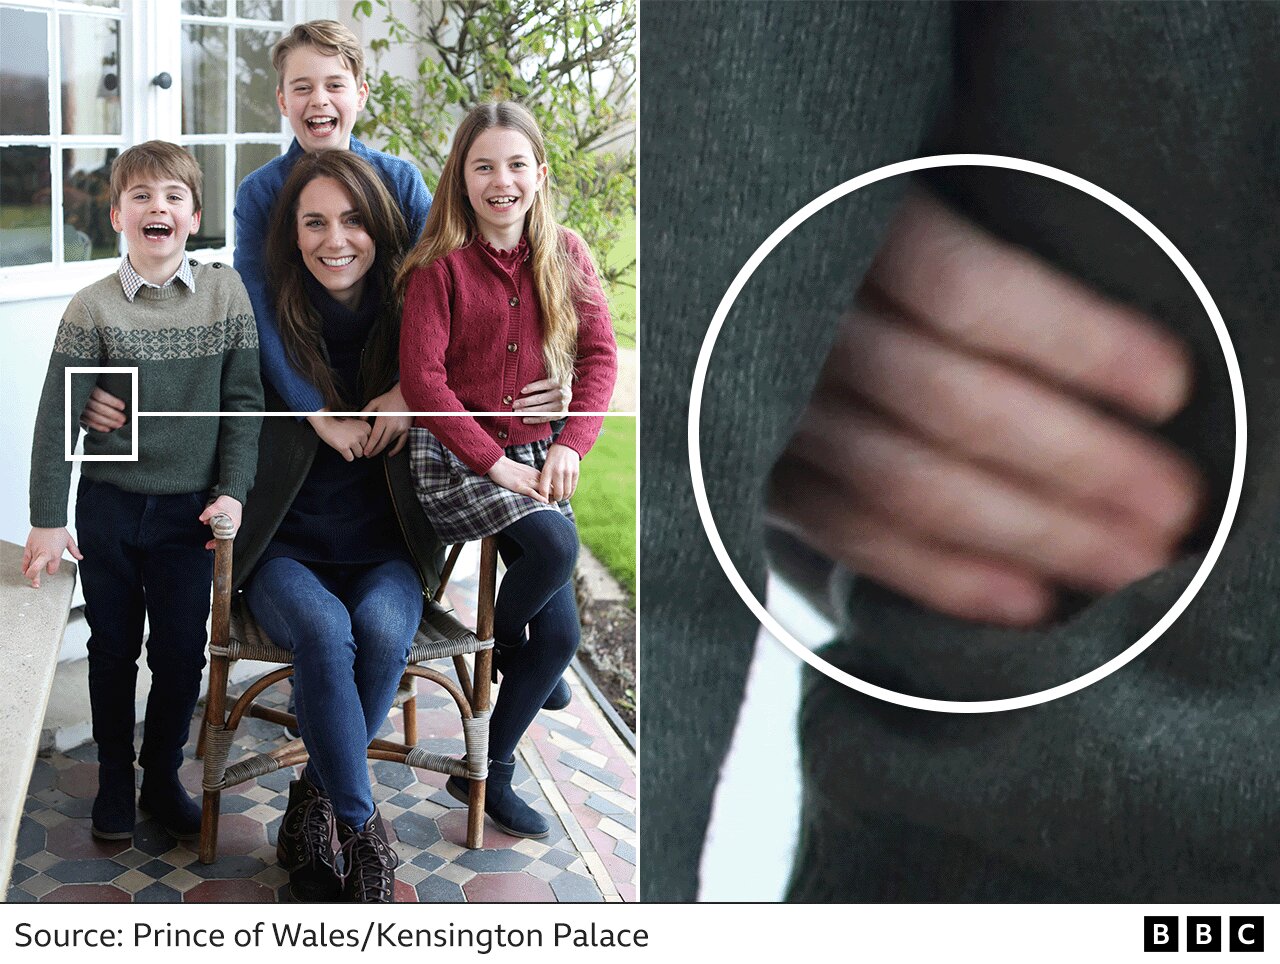 The picture of Catherine and her children with blurring around Catherine's hand shown